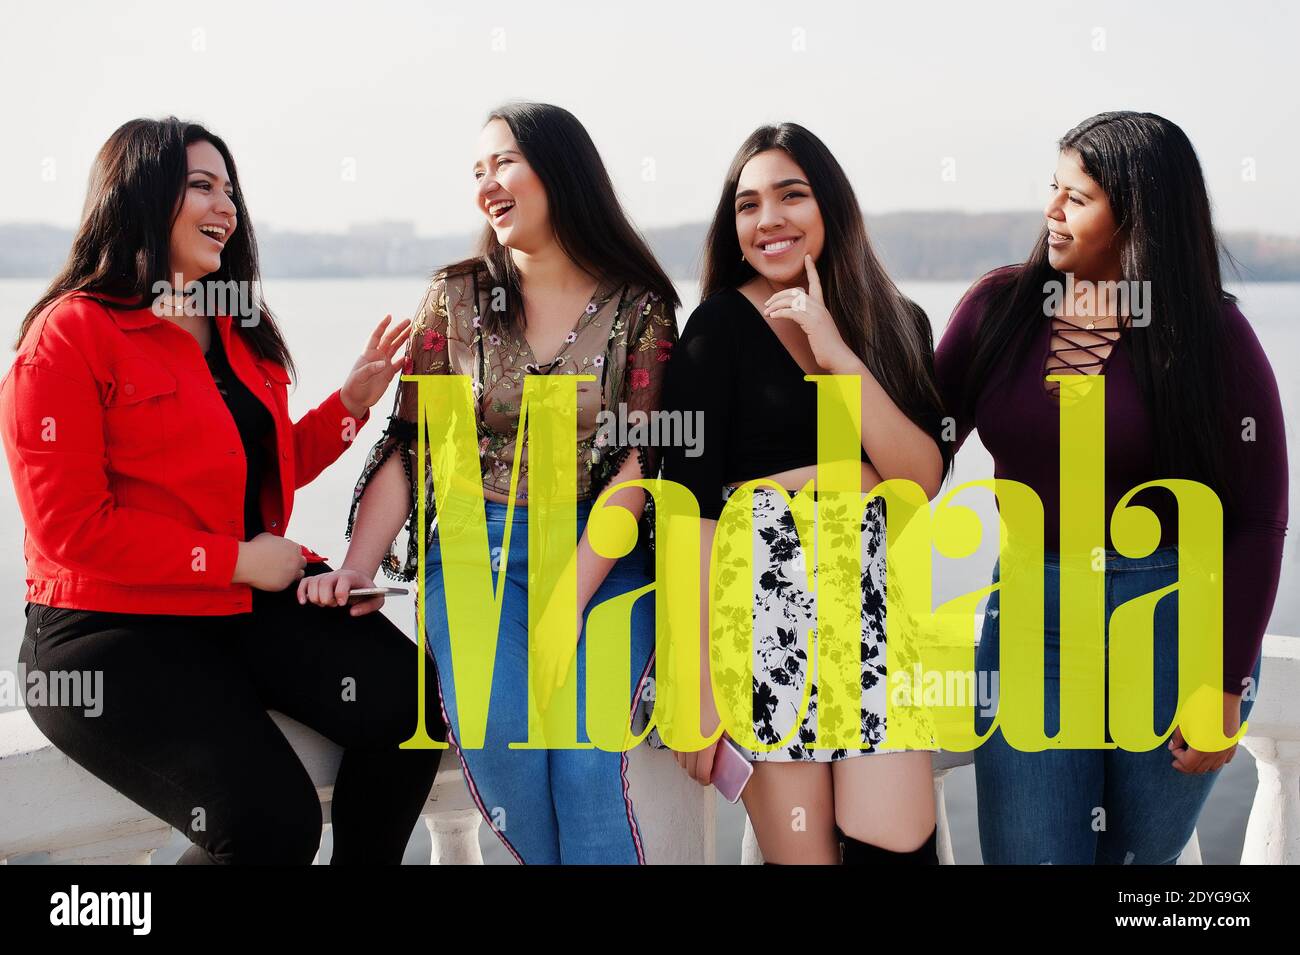 Machala city. Group of four happy and pretty latino girls from Ecuador. Stock Photo